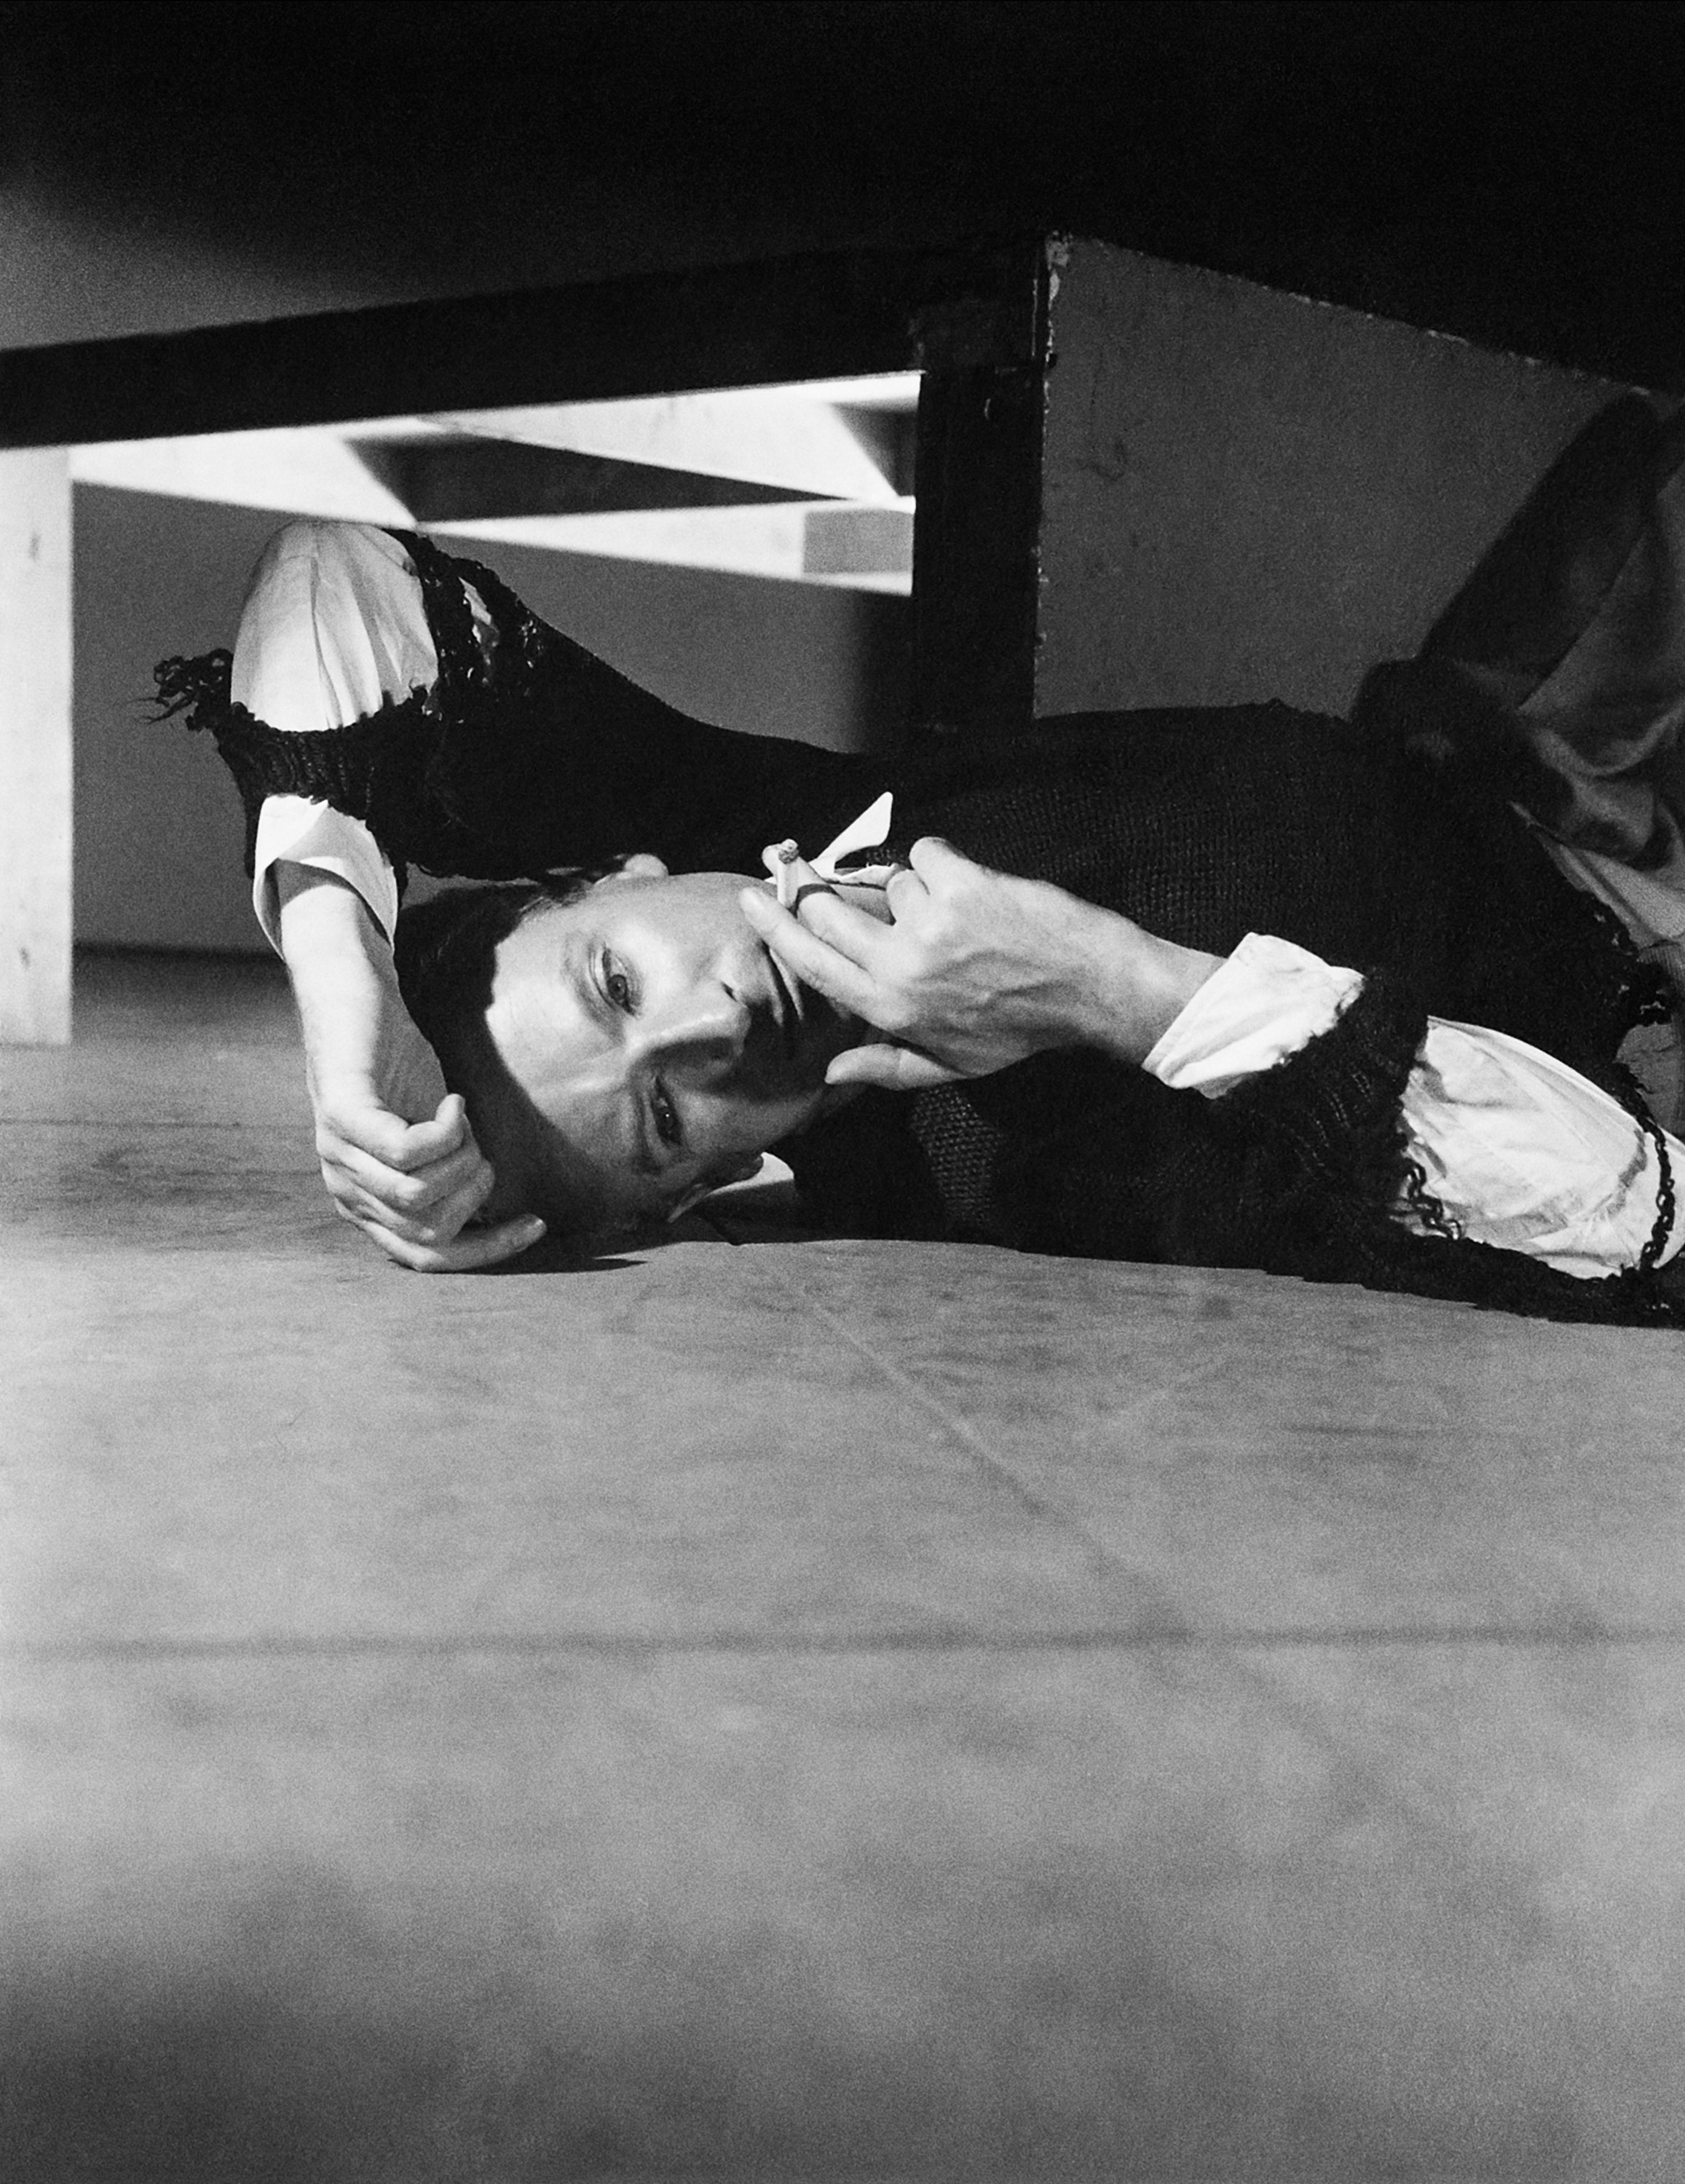 Ten Things You Might Not Know About Cecil Beaton